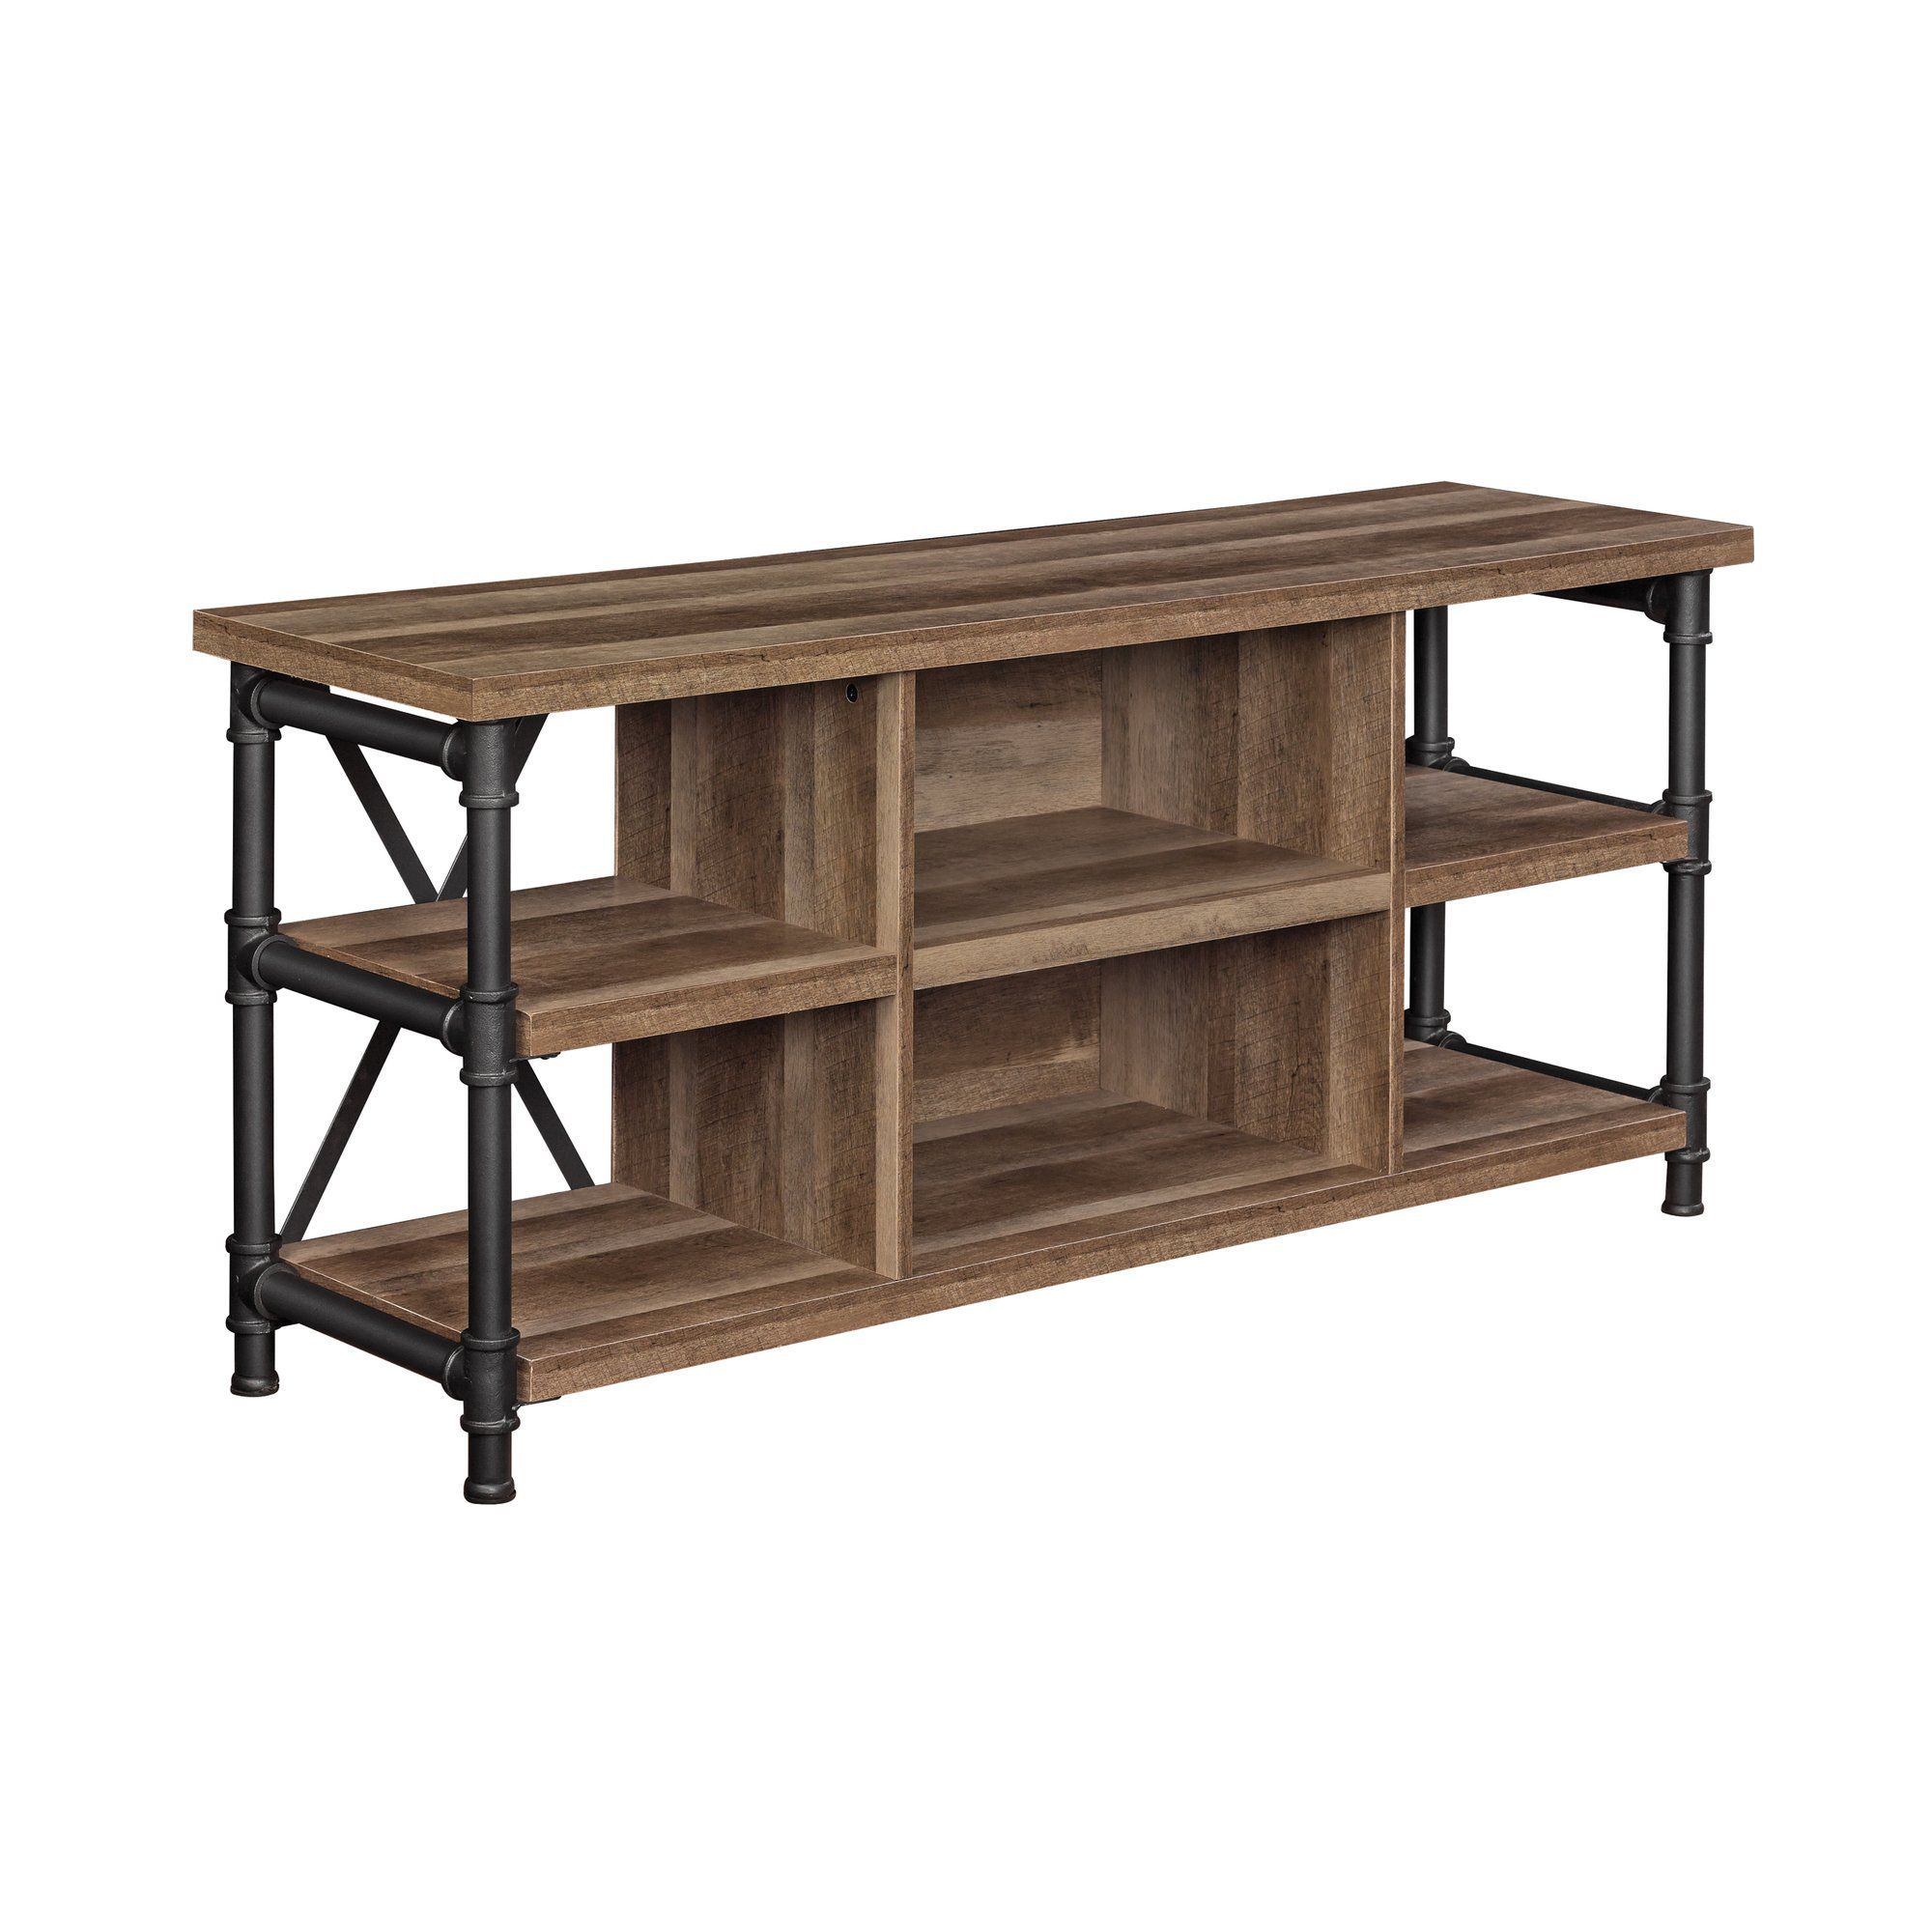 Bailys Tv Stand For Tvs Up To 65" With Optional Fireplace | For The For Casey Grey 54 Inch Tv Stands (View 2 of 30)